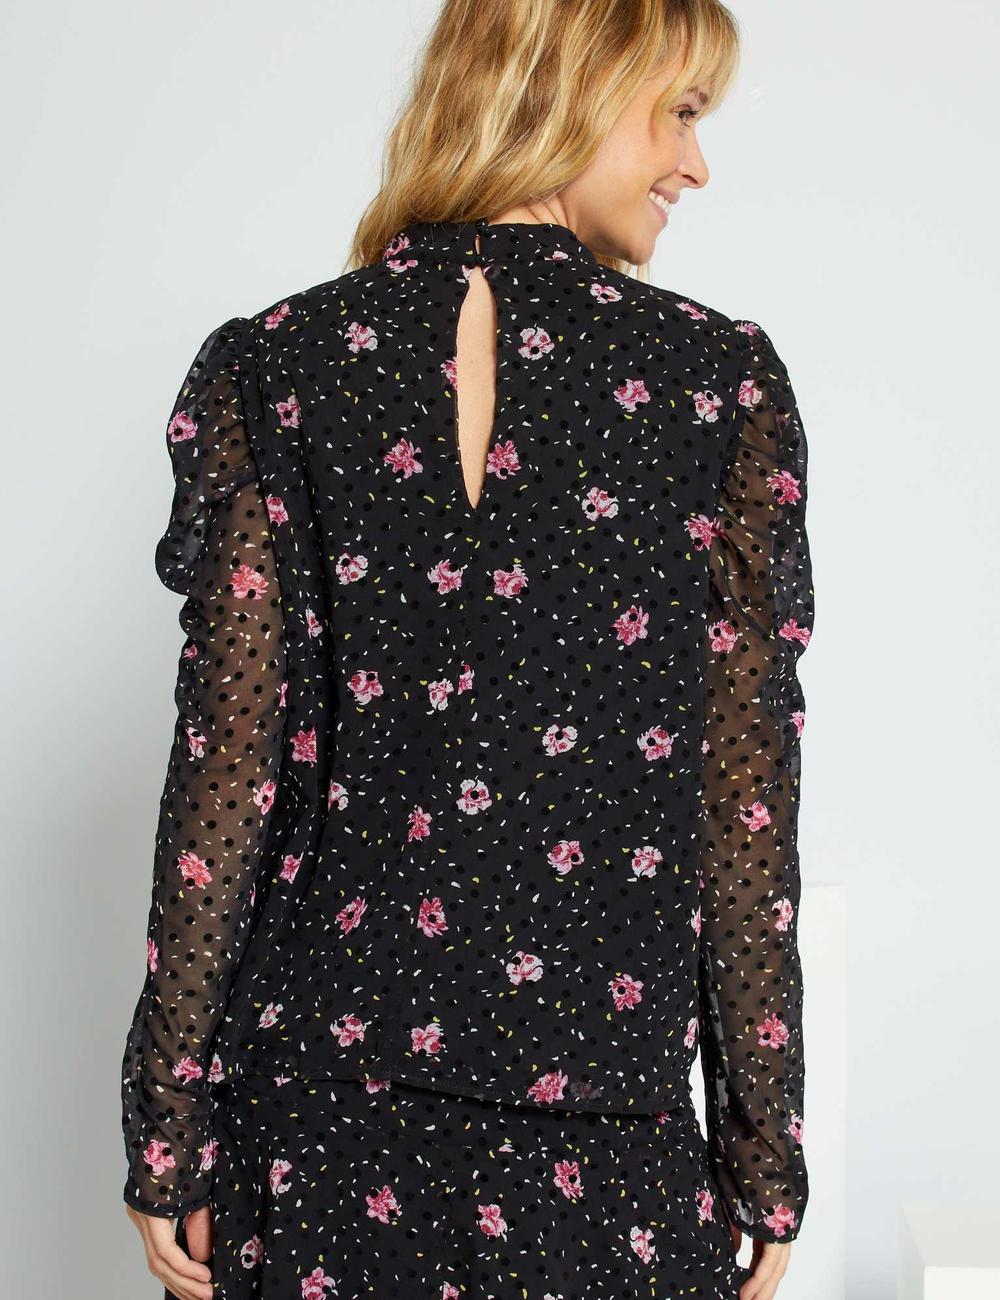 Buy Floral Print Blouse With Dotted Swiss Online In Dubai The Uae Kiabi